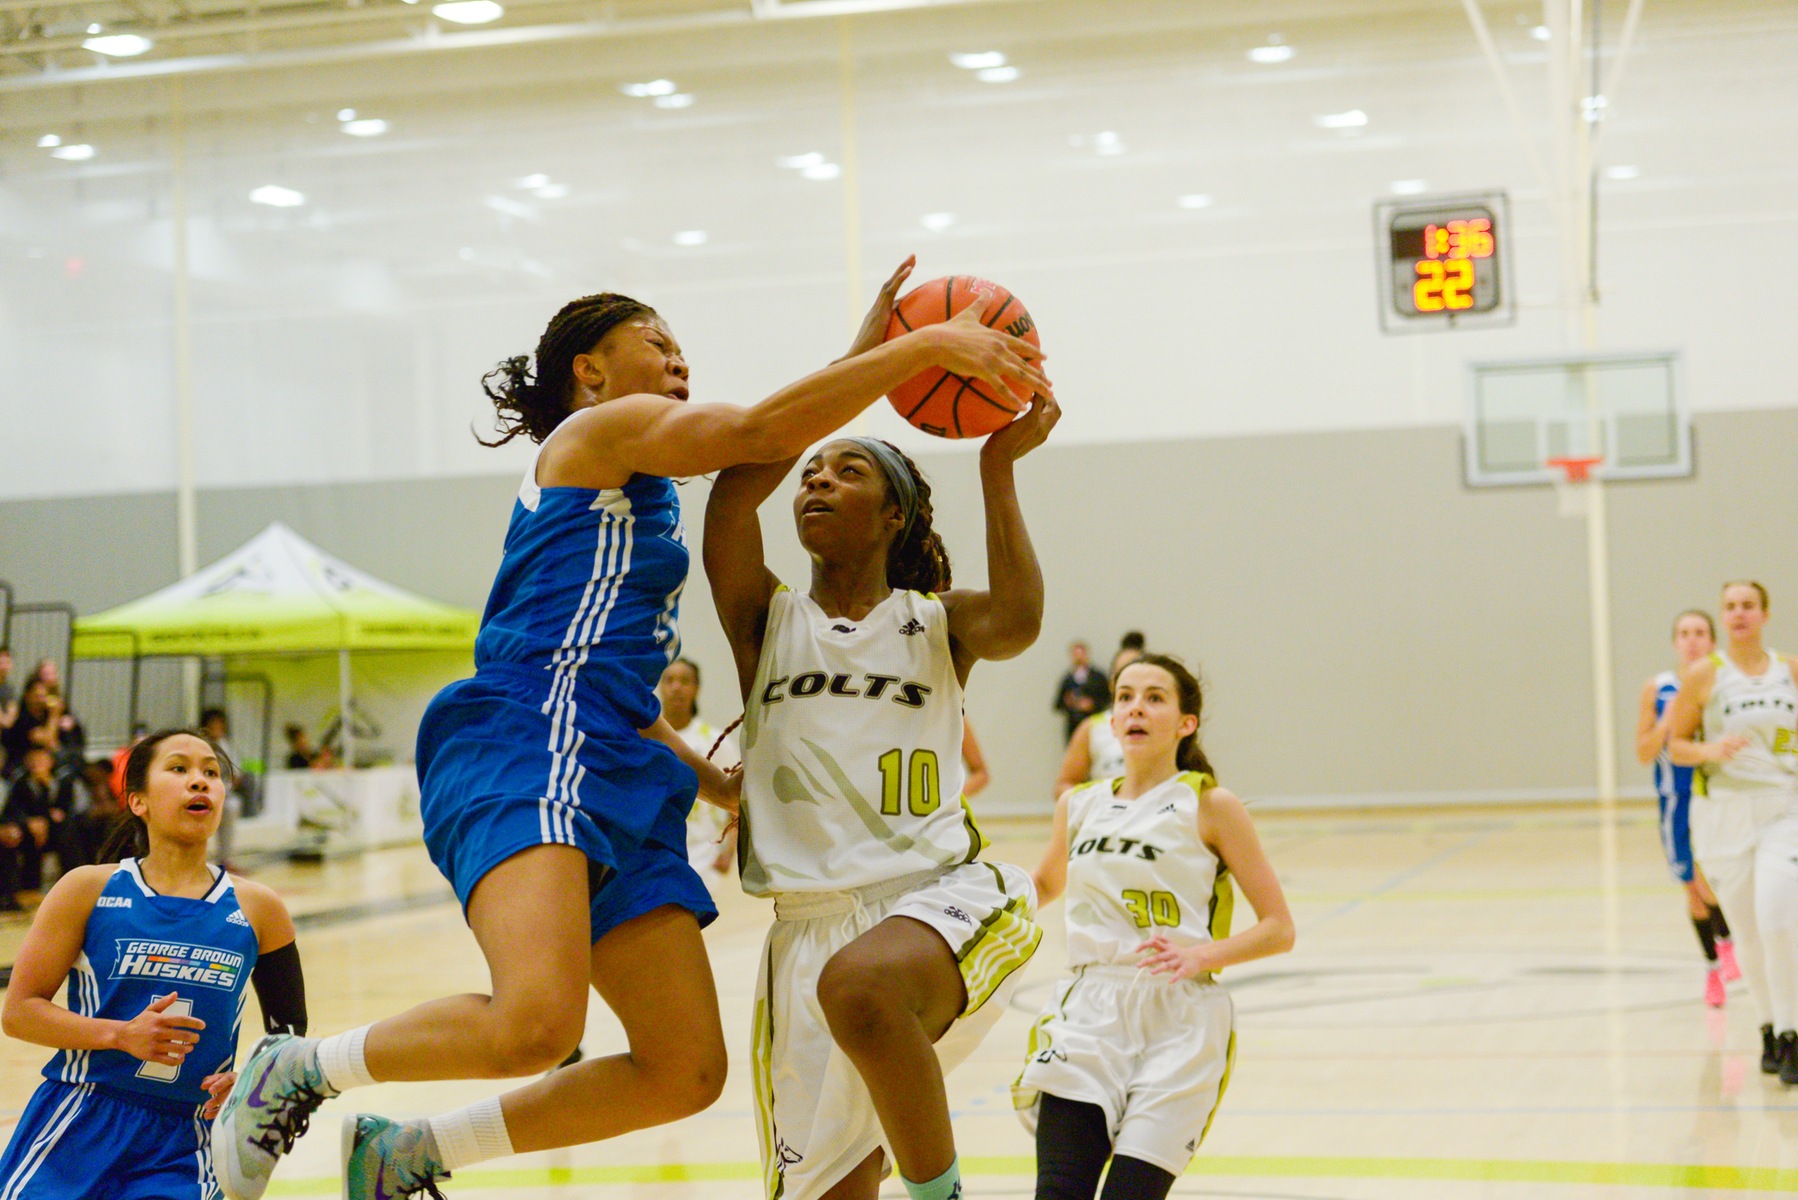 Colts forward Yasmeen Smith goes to the basket and tries to score against a George Brown player